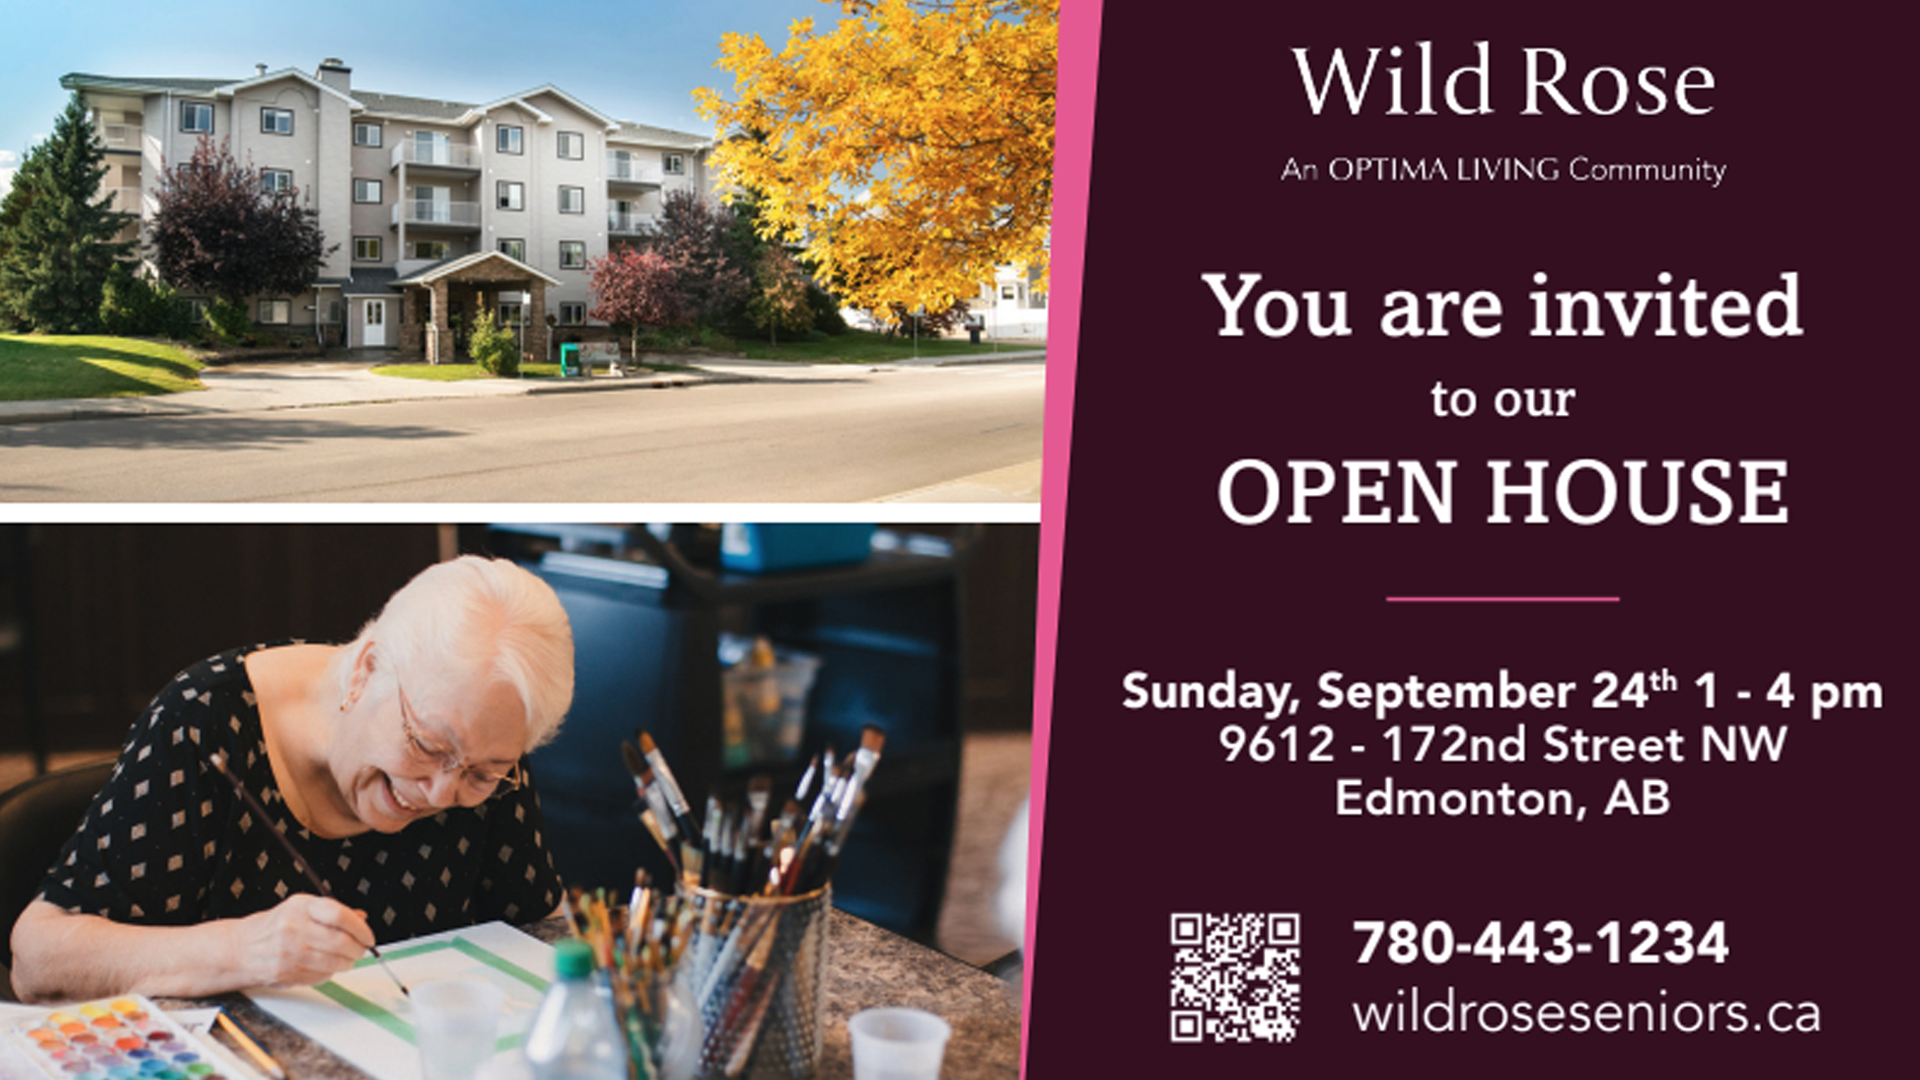 Open House feature for Wild Rose showing the building and invitation to join them on September 24th from 1-4 pm.